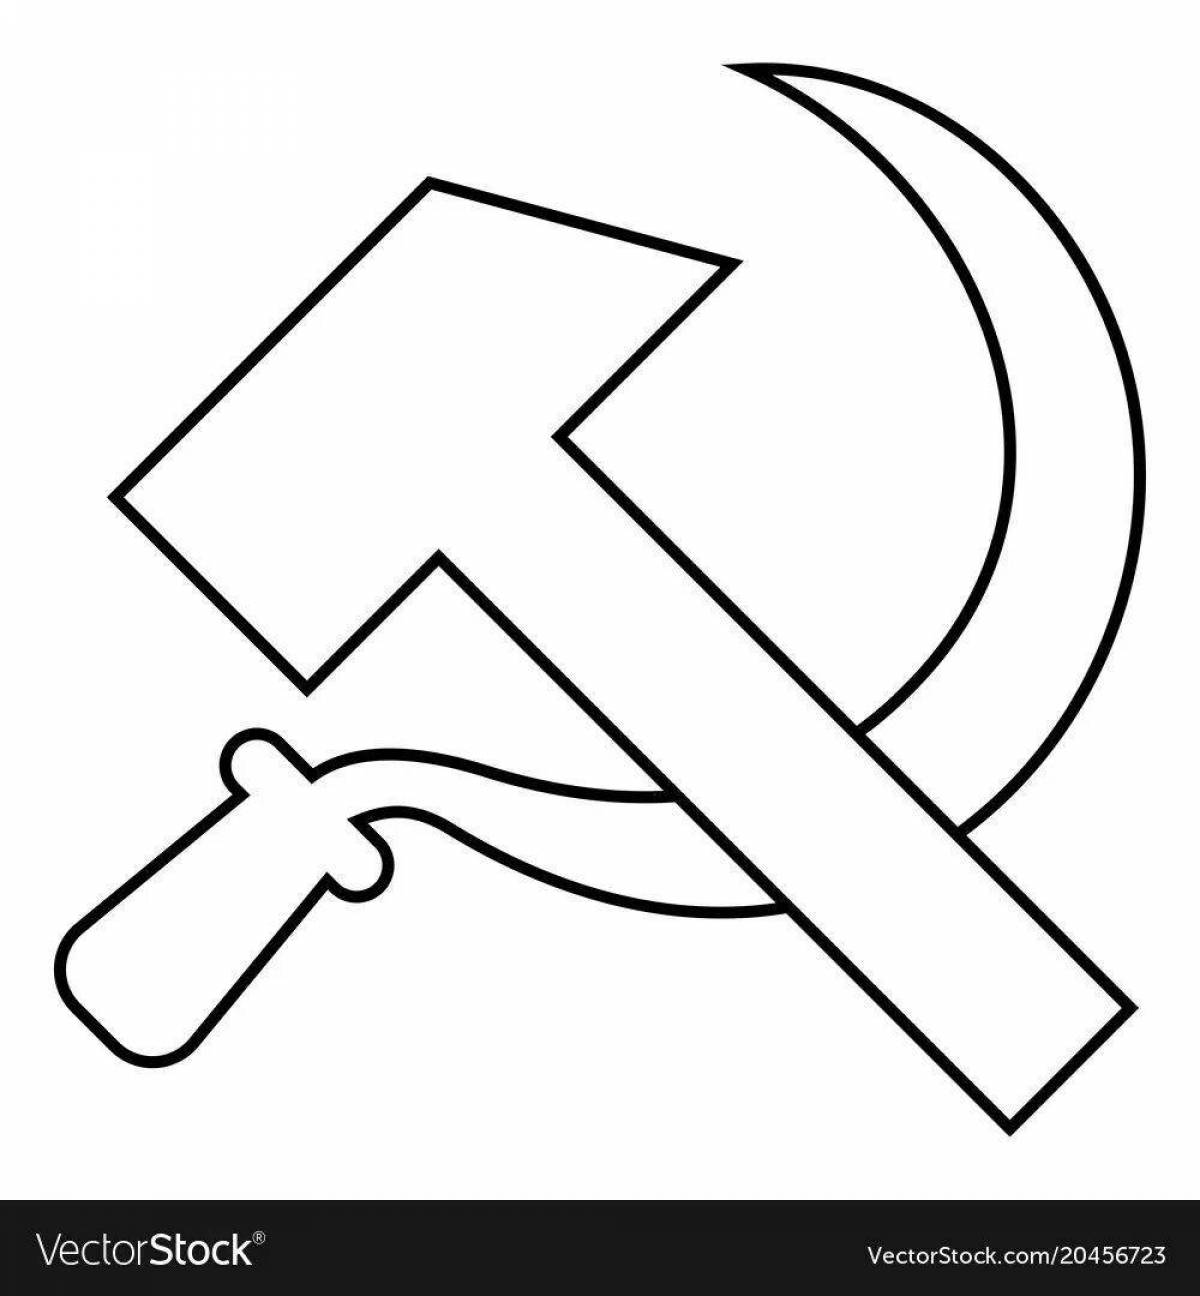 Majestic hammer and sickle coloring page